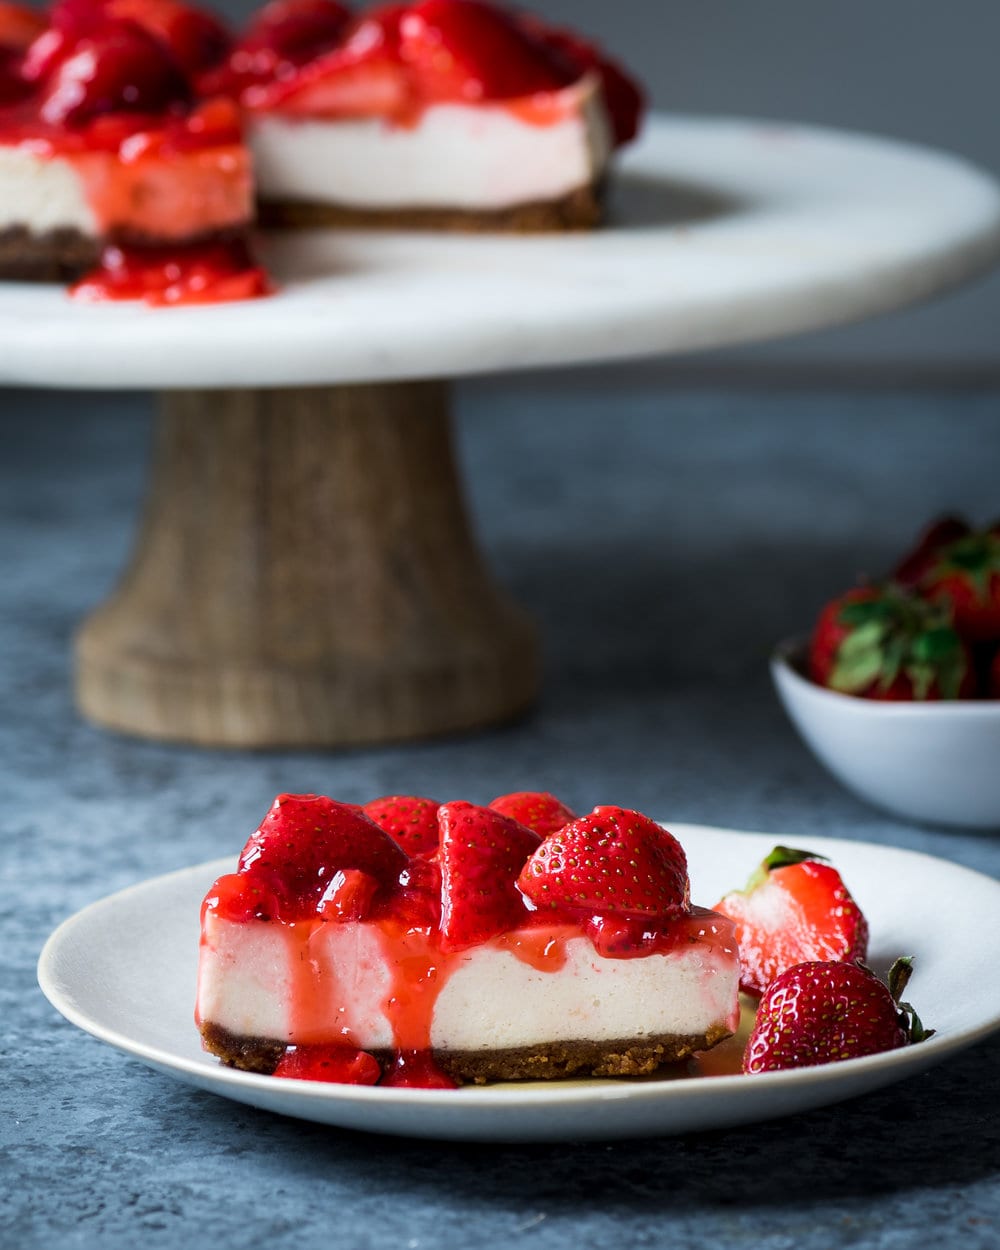 Vegan Instant Pot Cheesecake. How to Bake a Cheesecake in the Instant Pot.